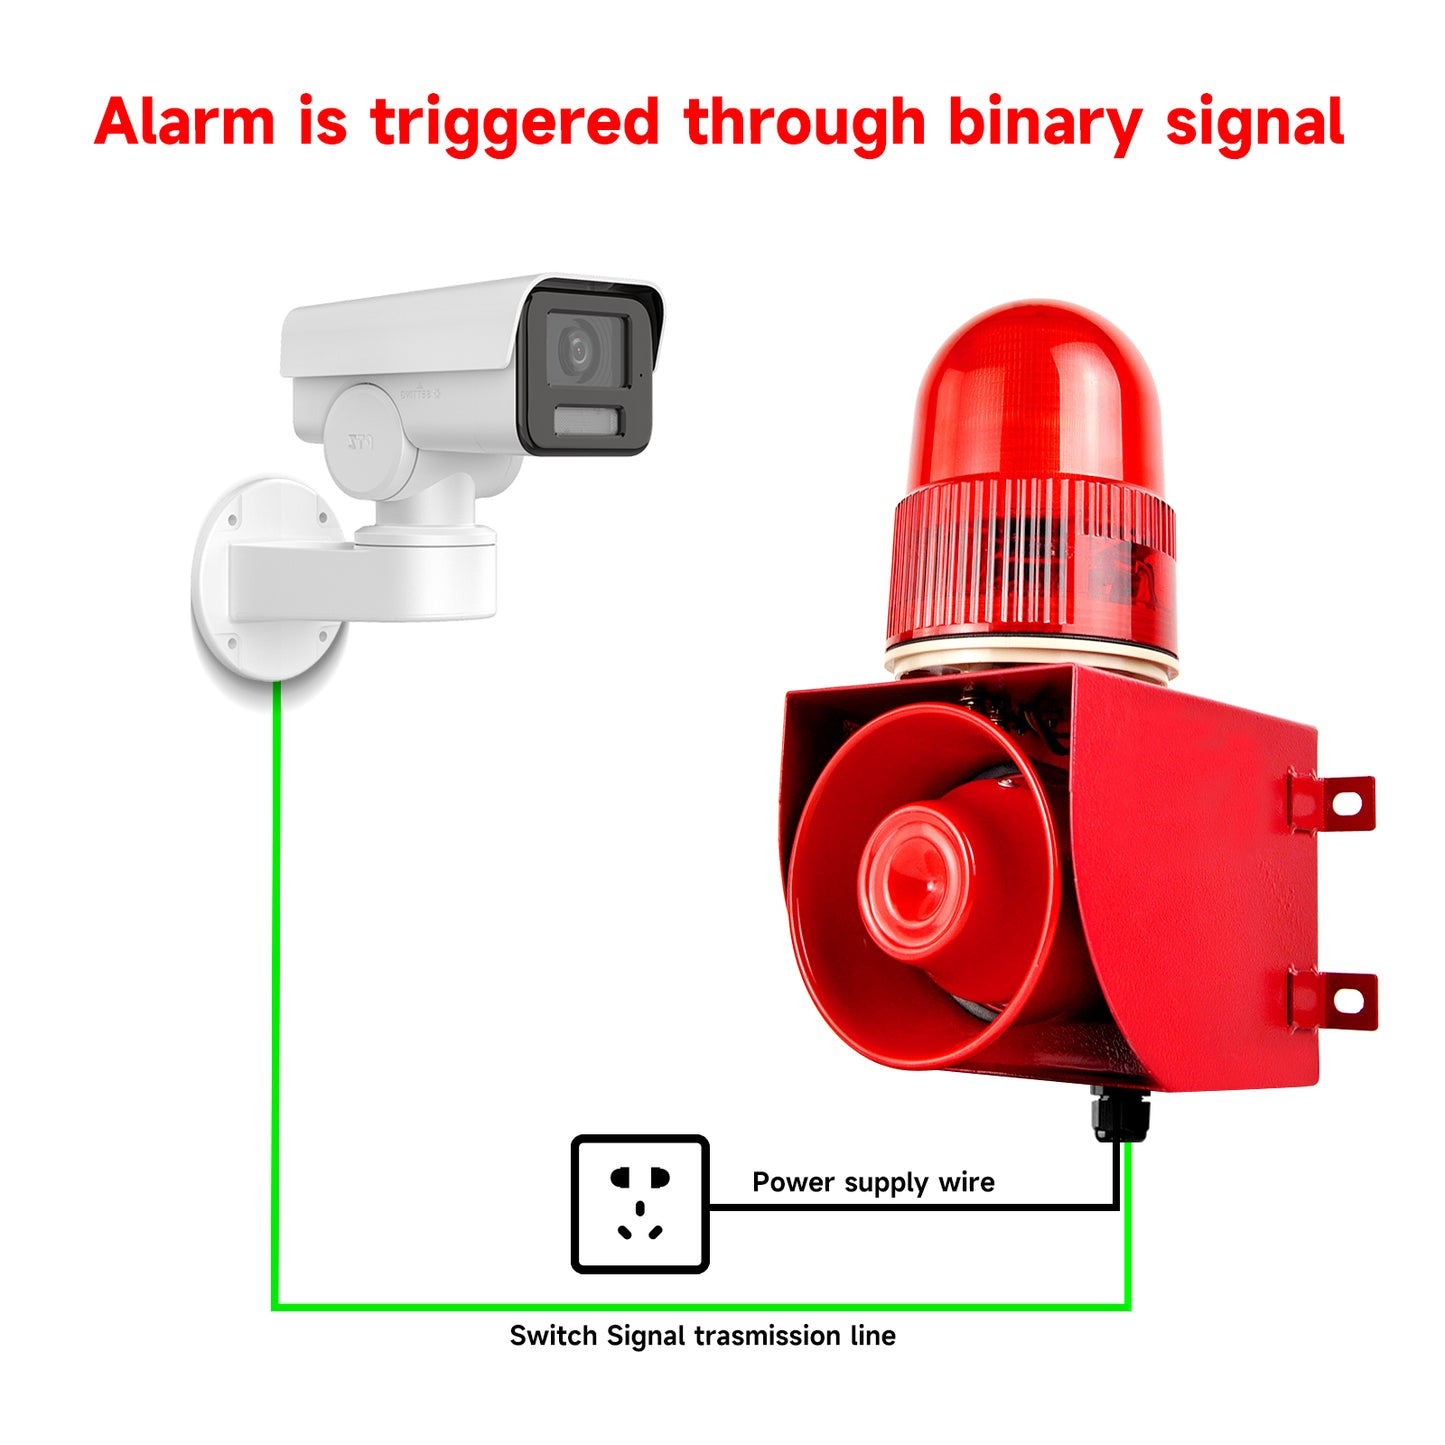 YASONG SLA-01K Security Strobe Light Siren Alarm, Switch Signal Triggered, Single Color & Single Tone Industrial Security System Alarm Kit for Security & PLC System Applications, 120dB Loud Horn 25W